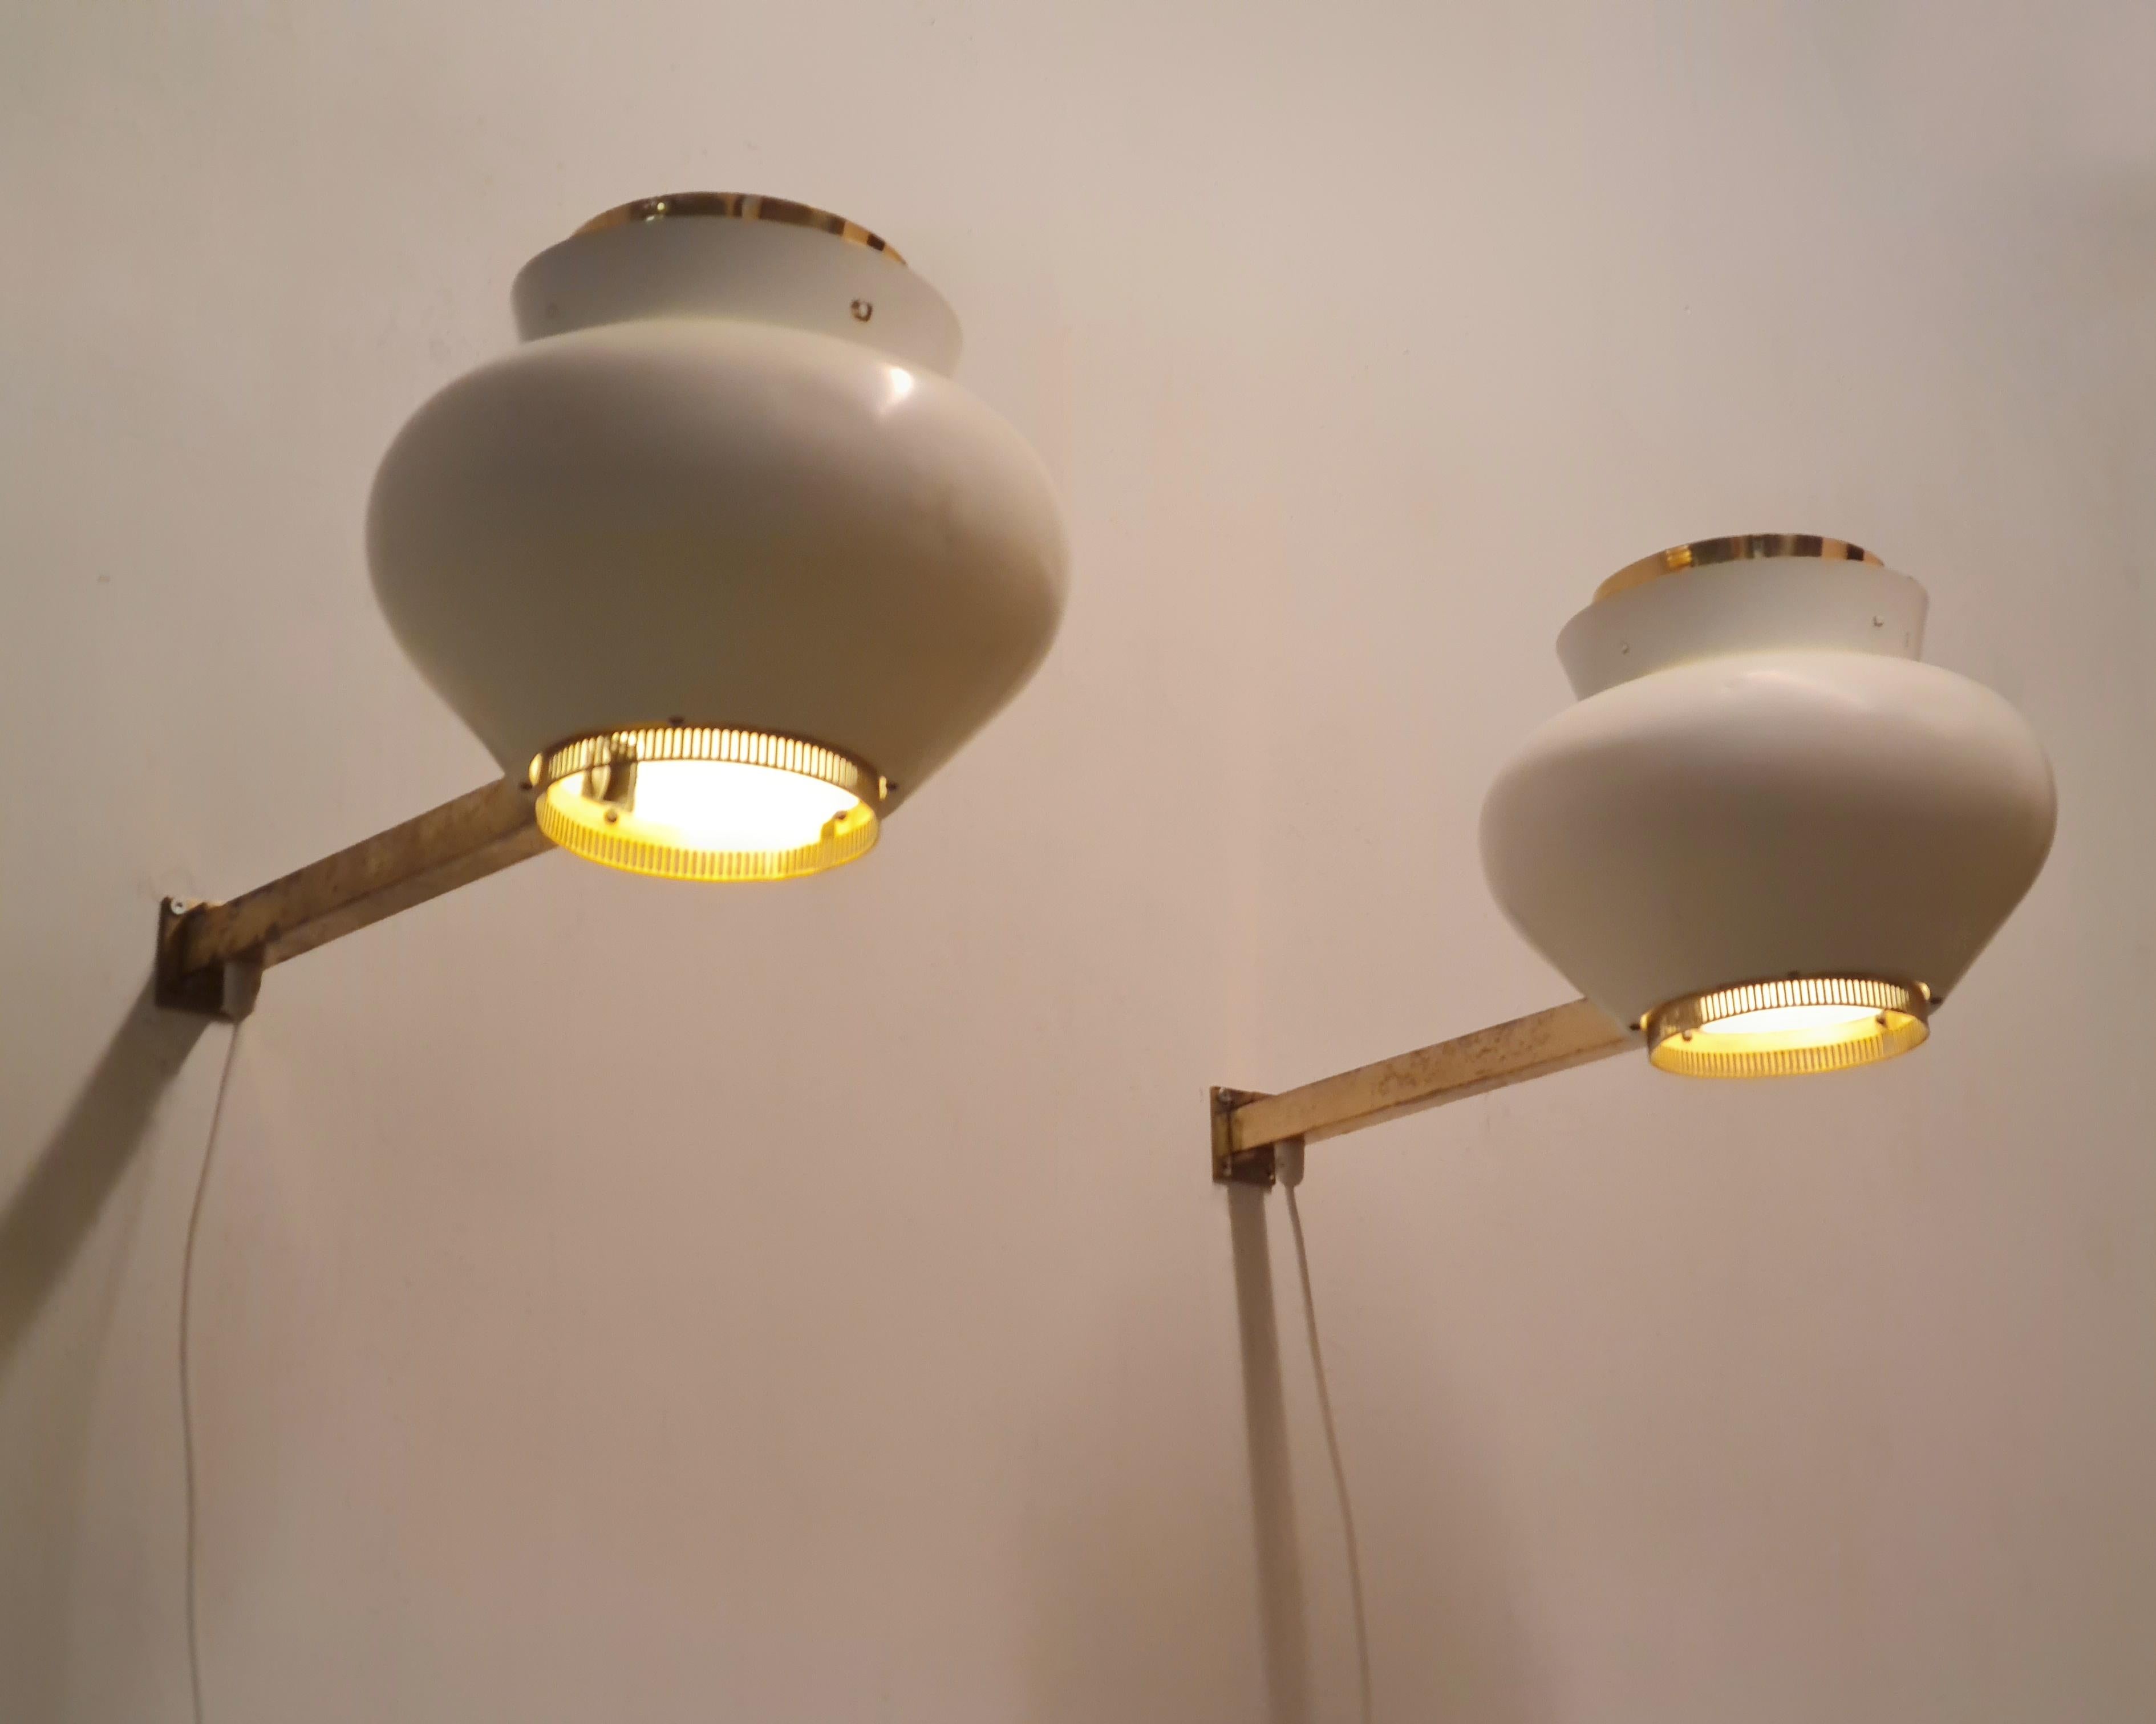 Scandinavian Modern A Pair of Alvar Aalto Commissioned Wall Lamps, Valaistustyö 1950s For Sale